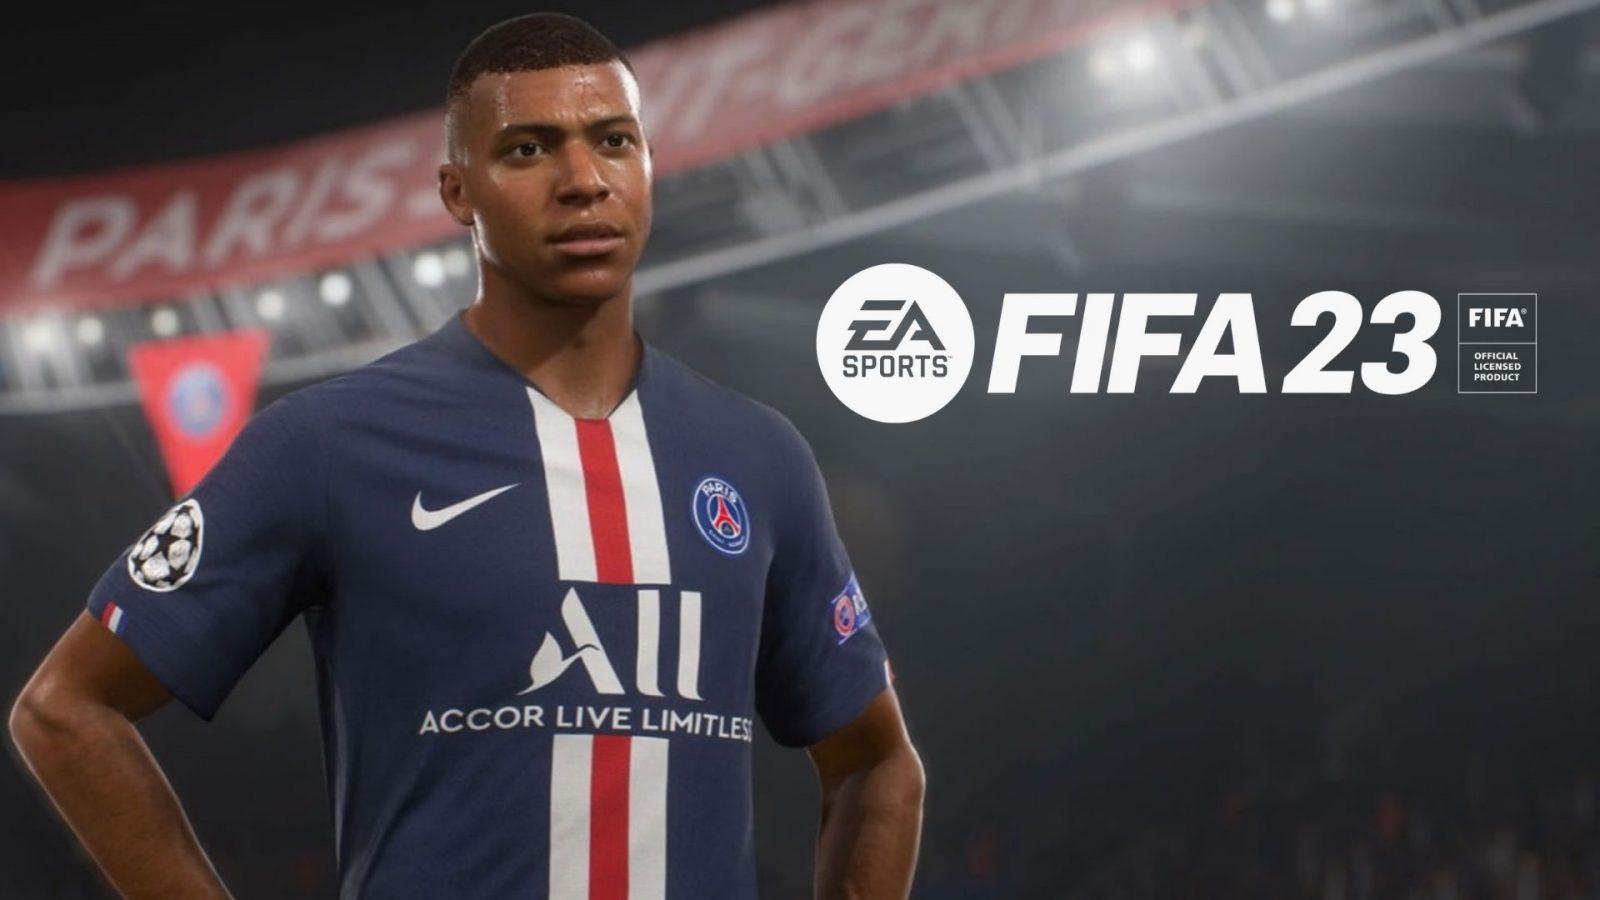 kylian mbappe with hands on hips in fifa 23